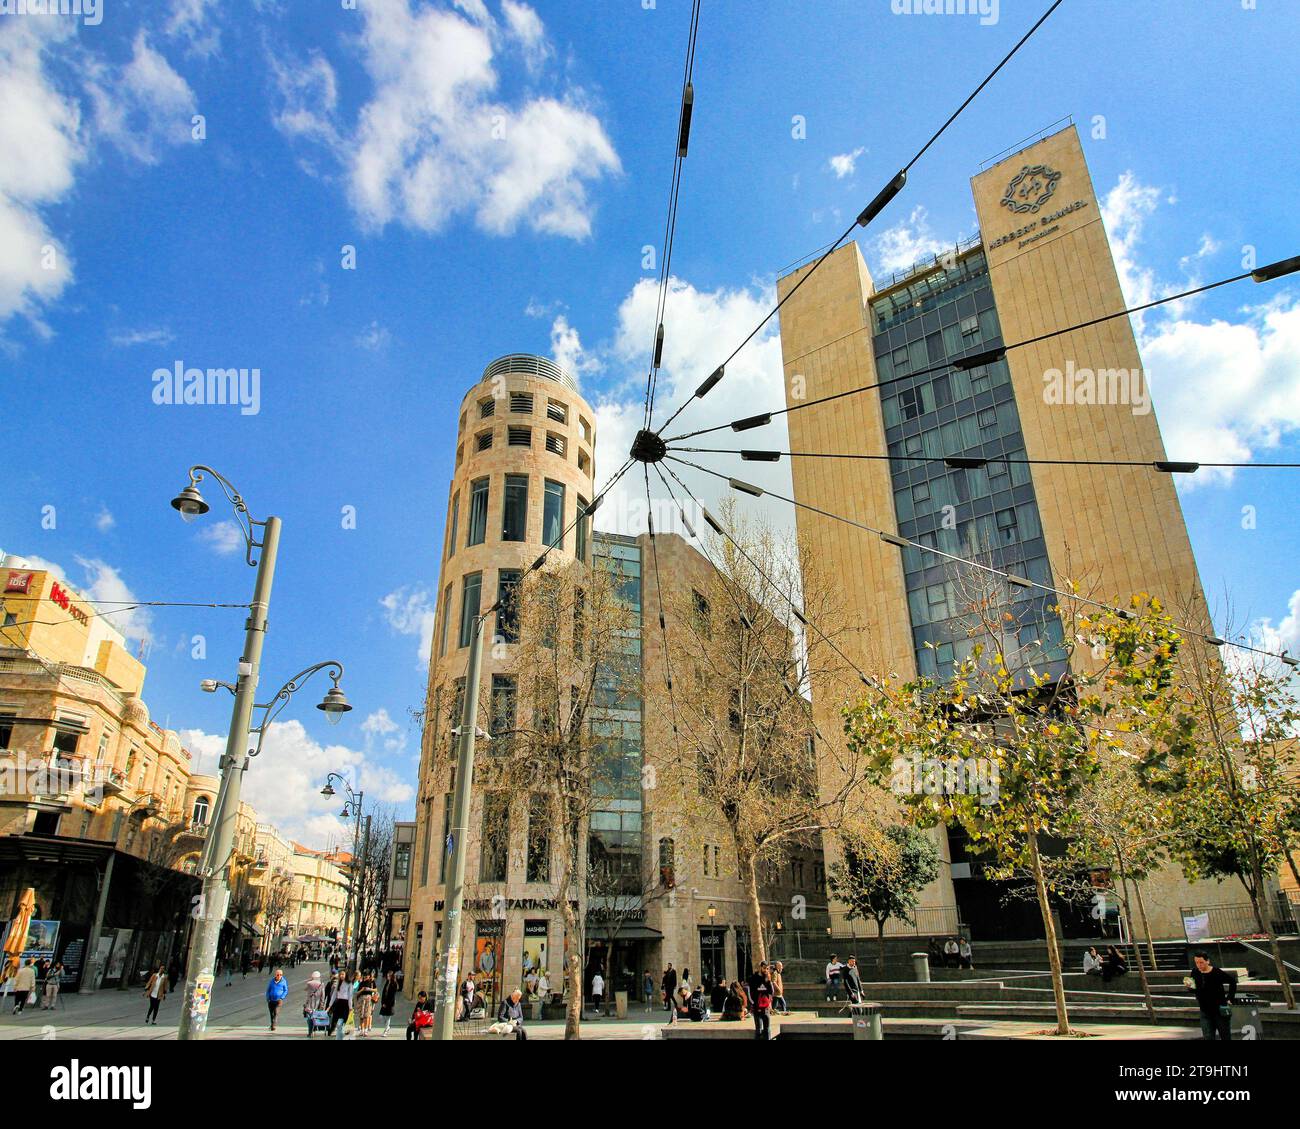 A wide-angle view of buildings, light rail, and electric grid at Zion Square on Jaffa Street and the Ben Yehuda pedestrian mall. Stock Photo